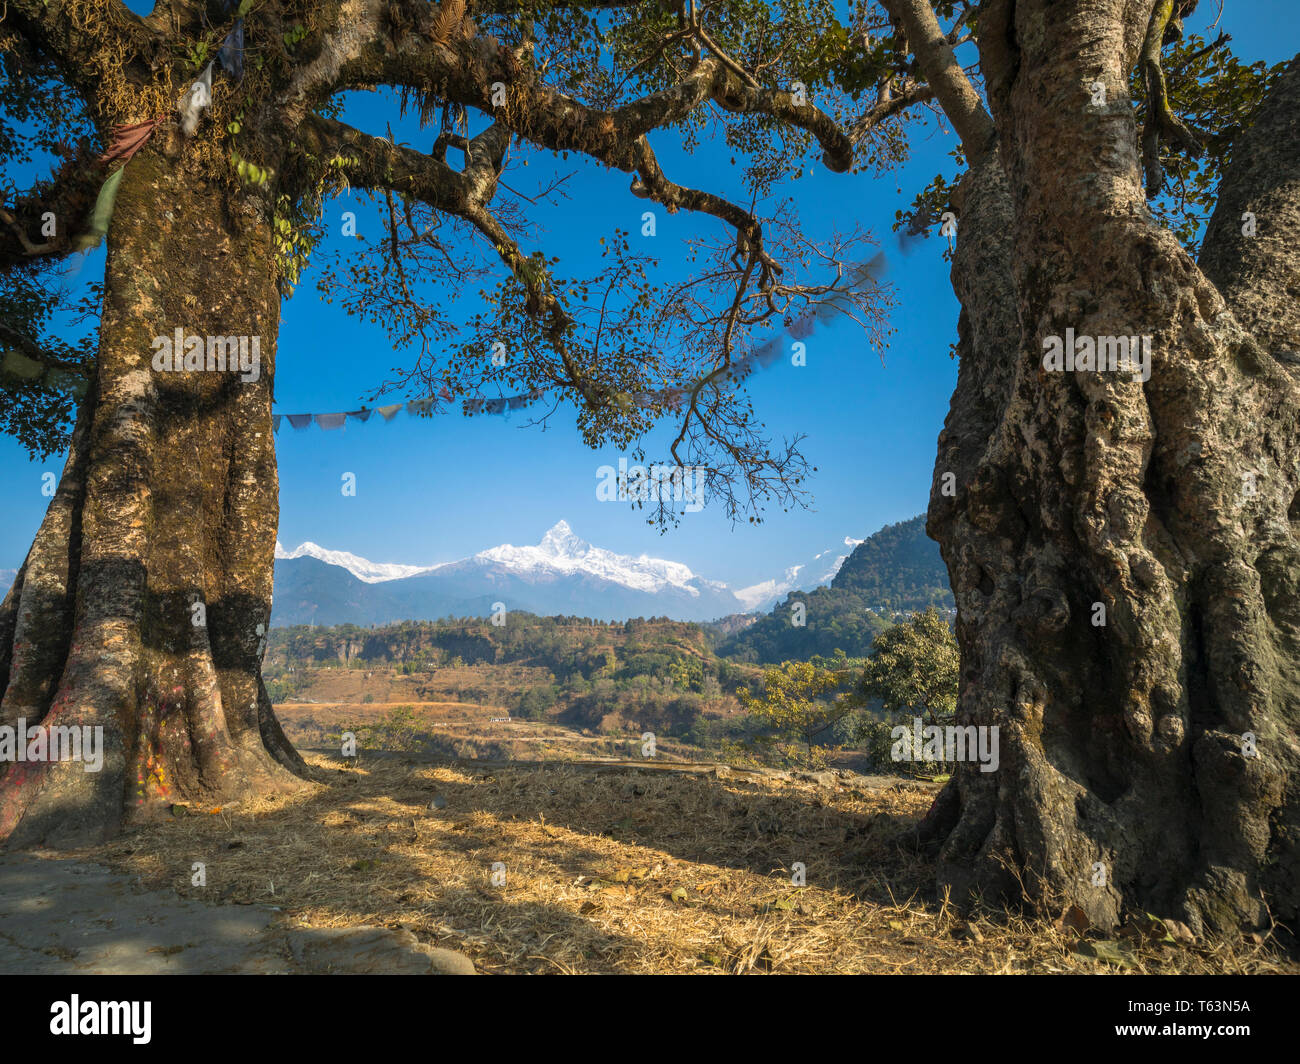 Two Pee pal Trees in between trees long view Fishtail mountain in Nepal Stock Photo